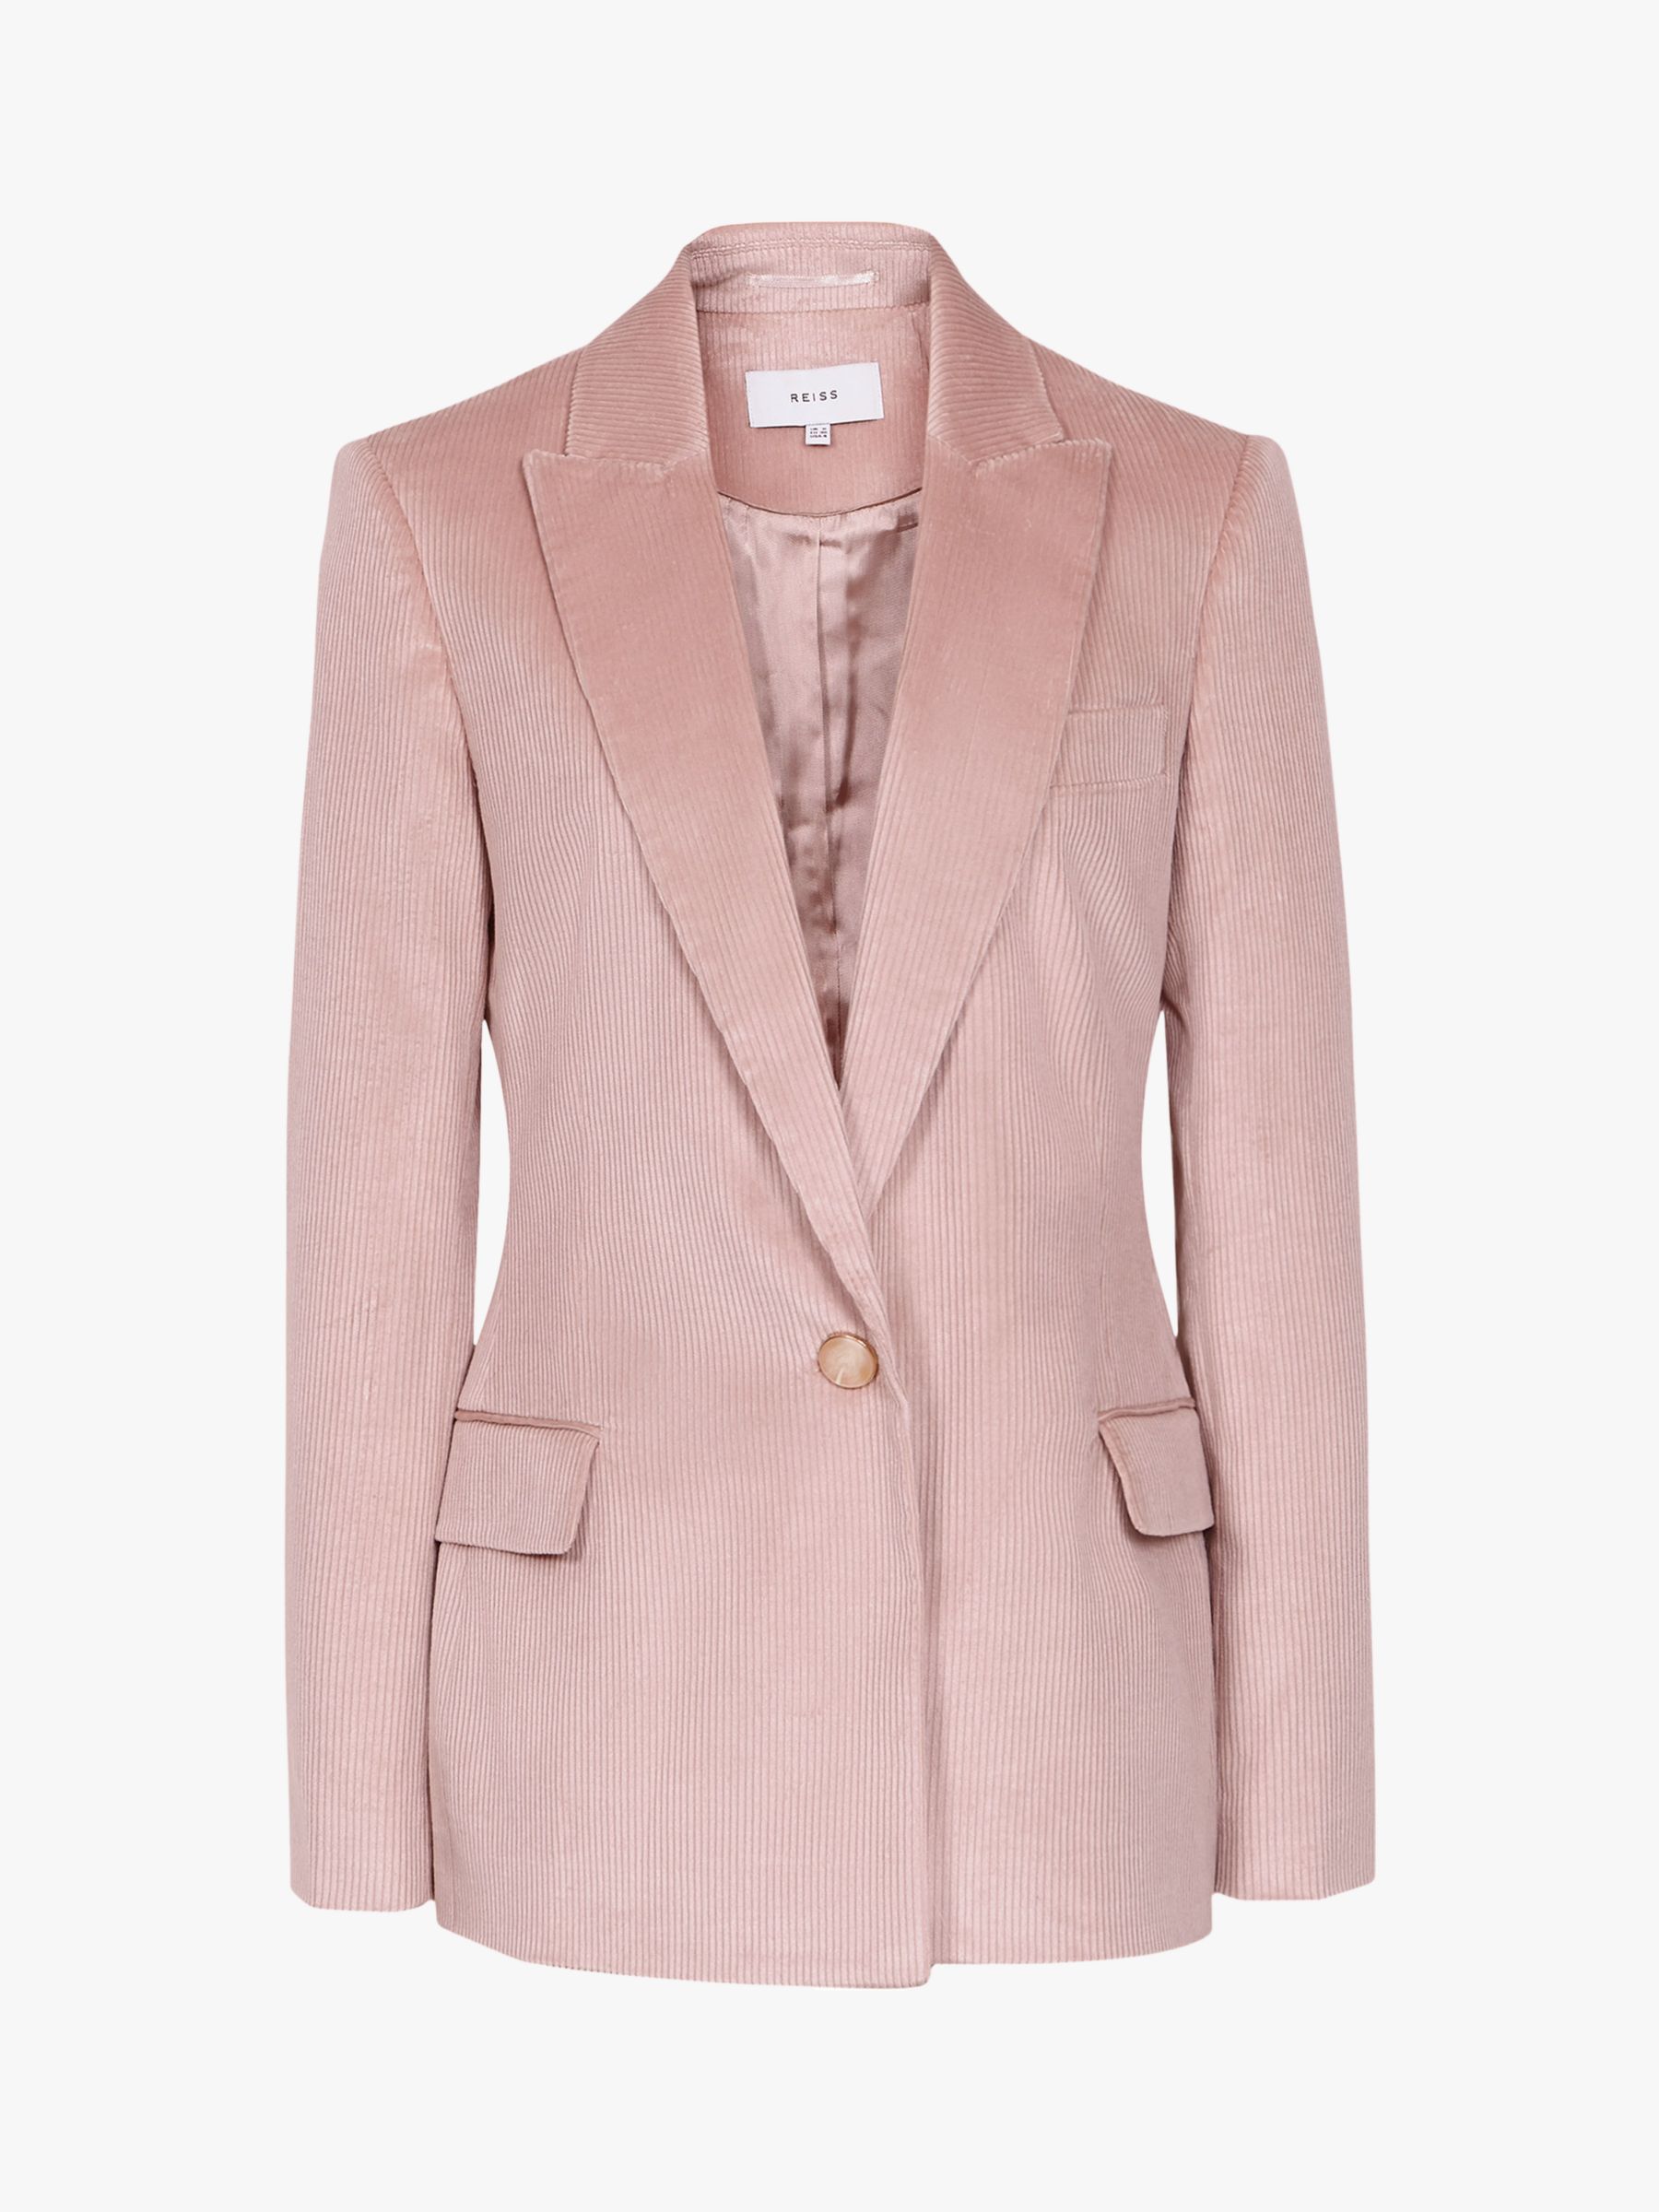 Reiss Carie Jacket, Pink at John Lewis & Partners